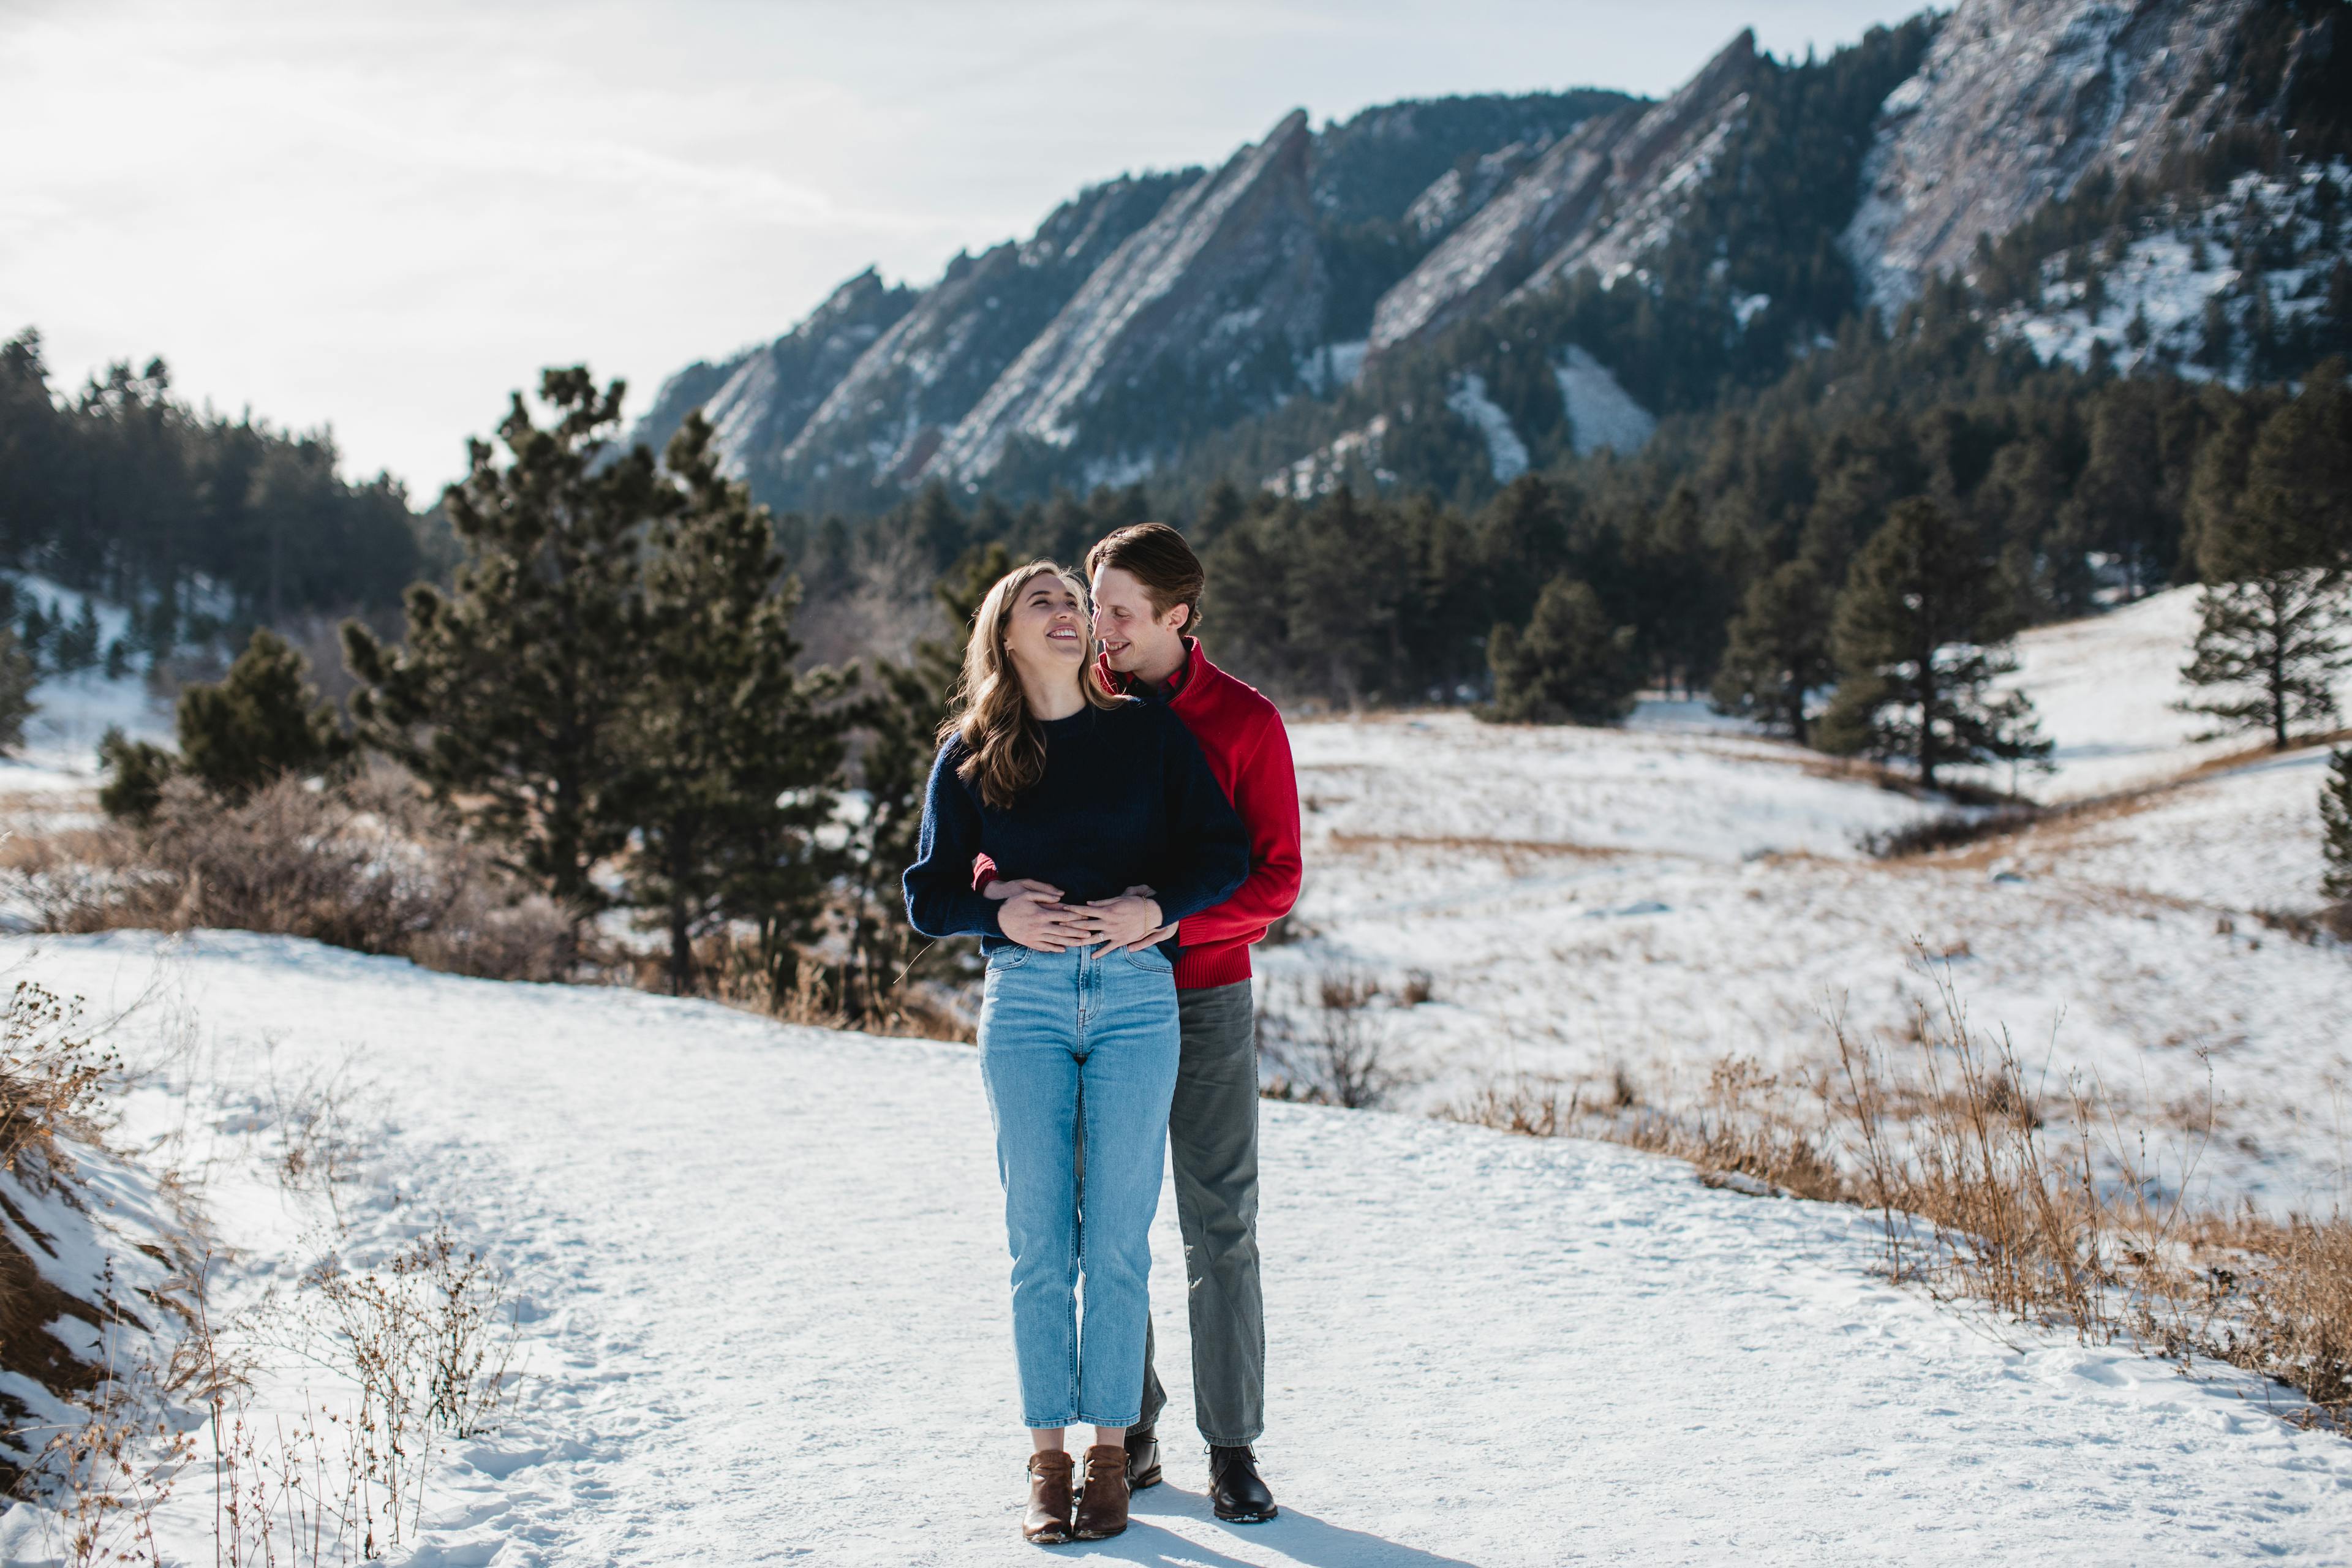 Couple embracing and kissing in a snowy mountainous setting